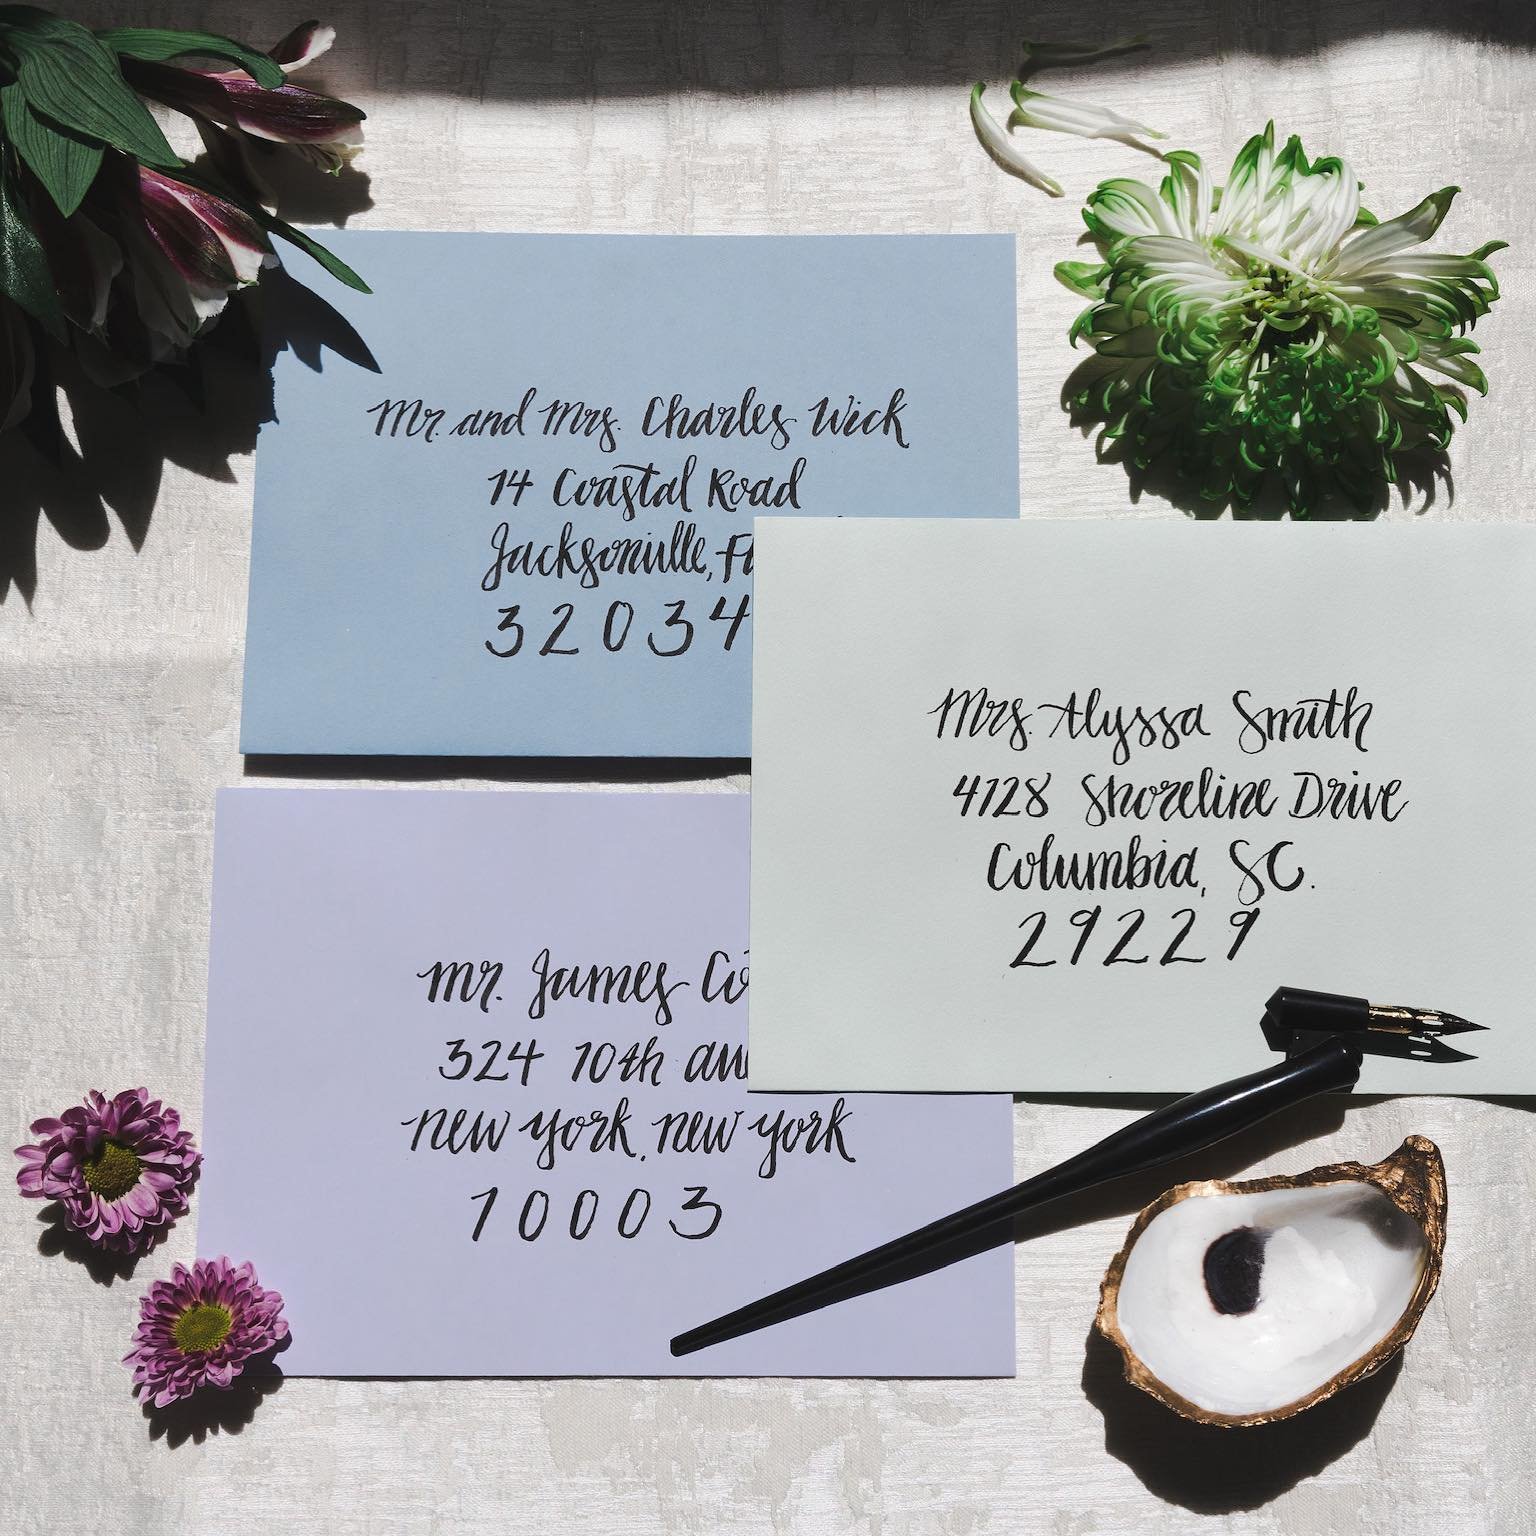 Handwritten calligraphy is a traditional touch that personalizes each invitation suite and provides the WOW factor when your guests open their mailbox ✍🏻

*All names and addresses are fake 

#weddinginvitations #calligraphy #handwrittencalligraphy #